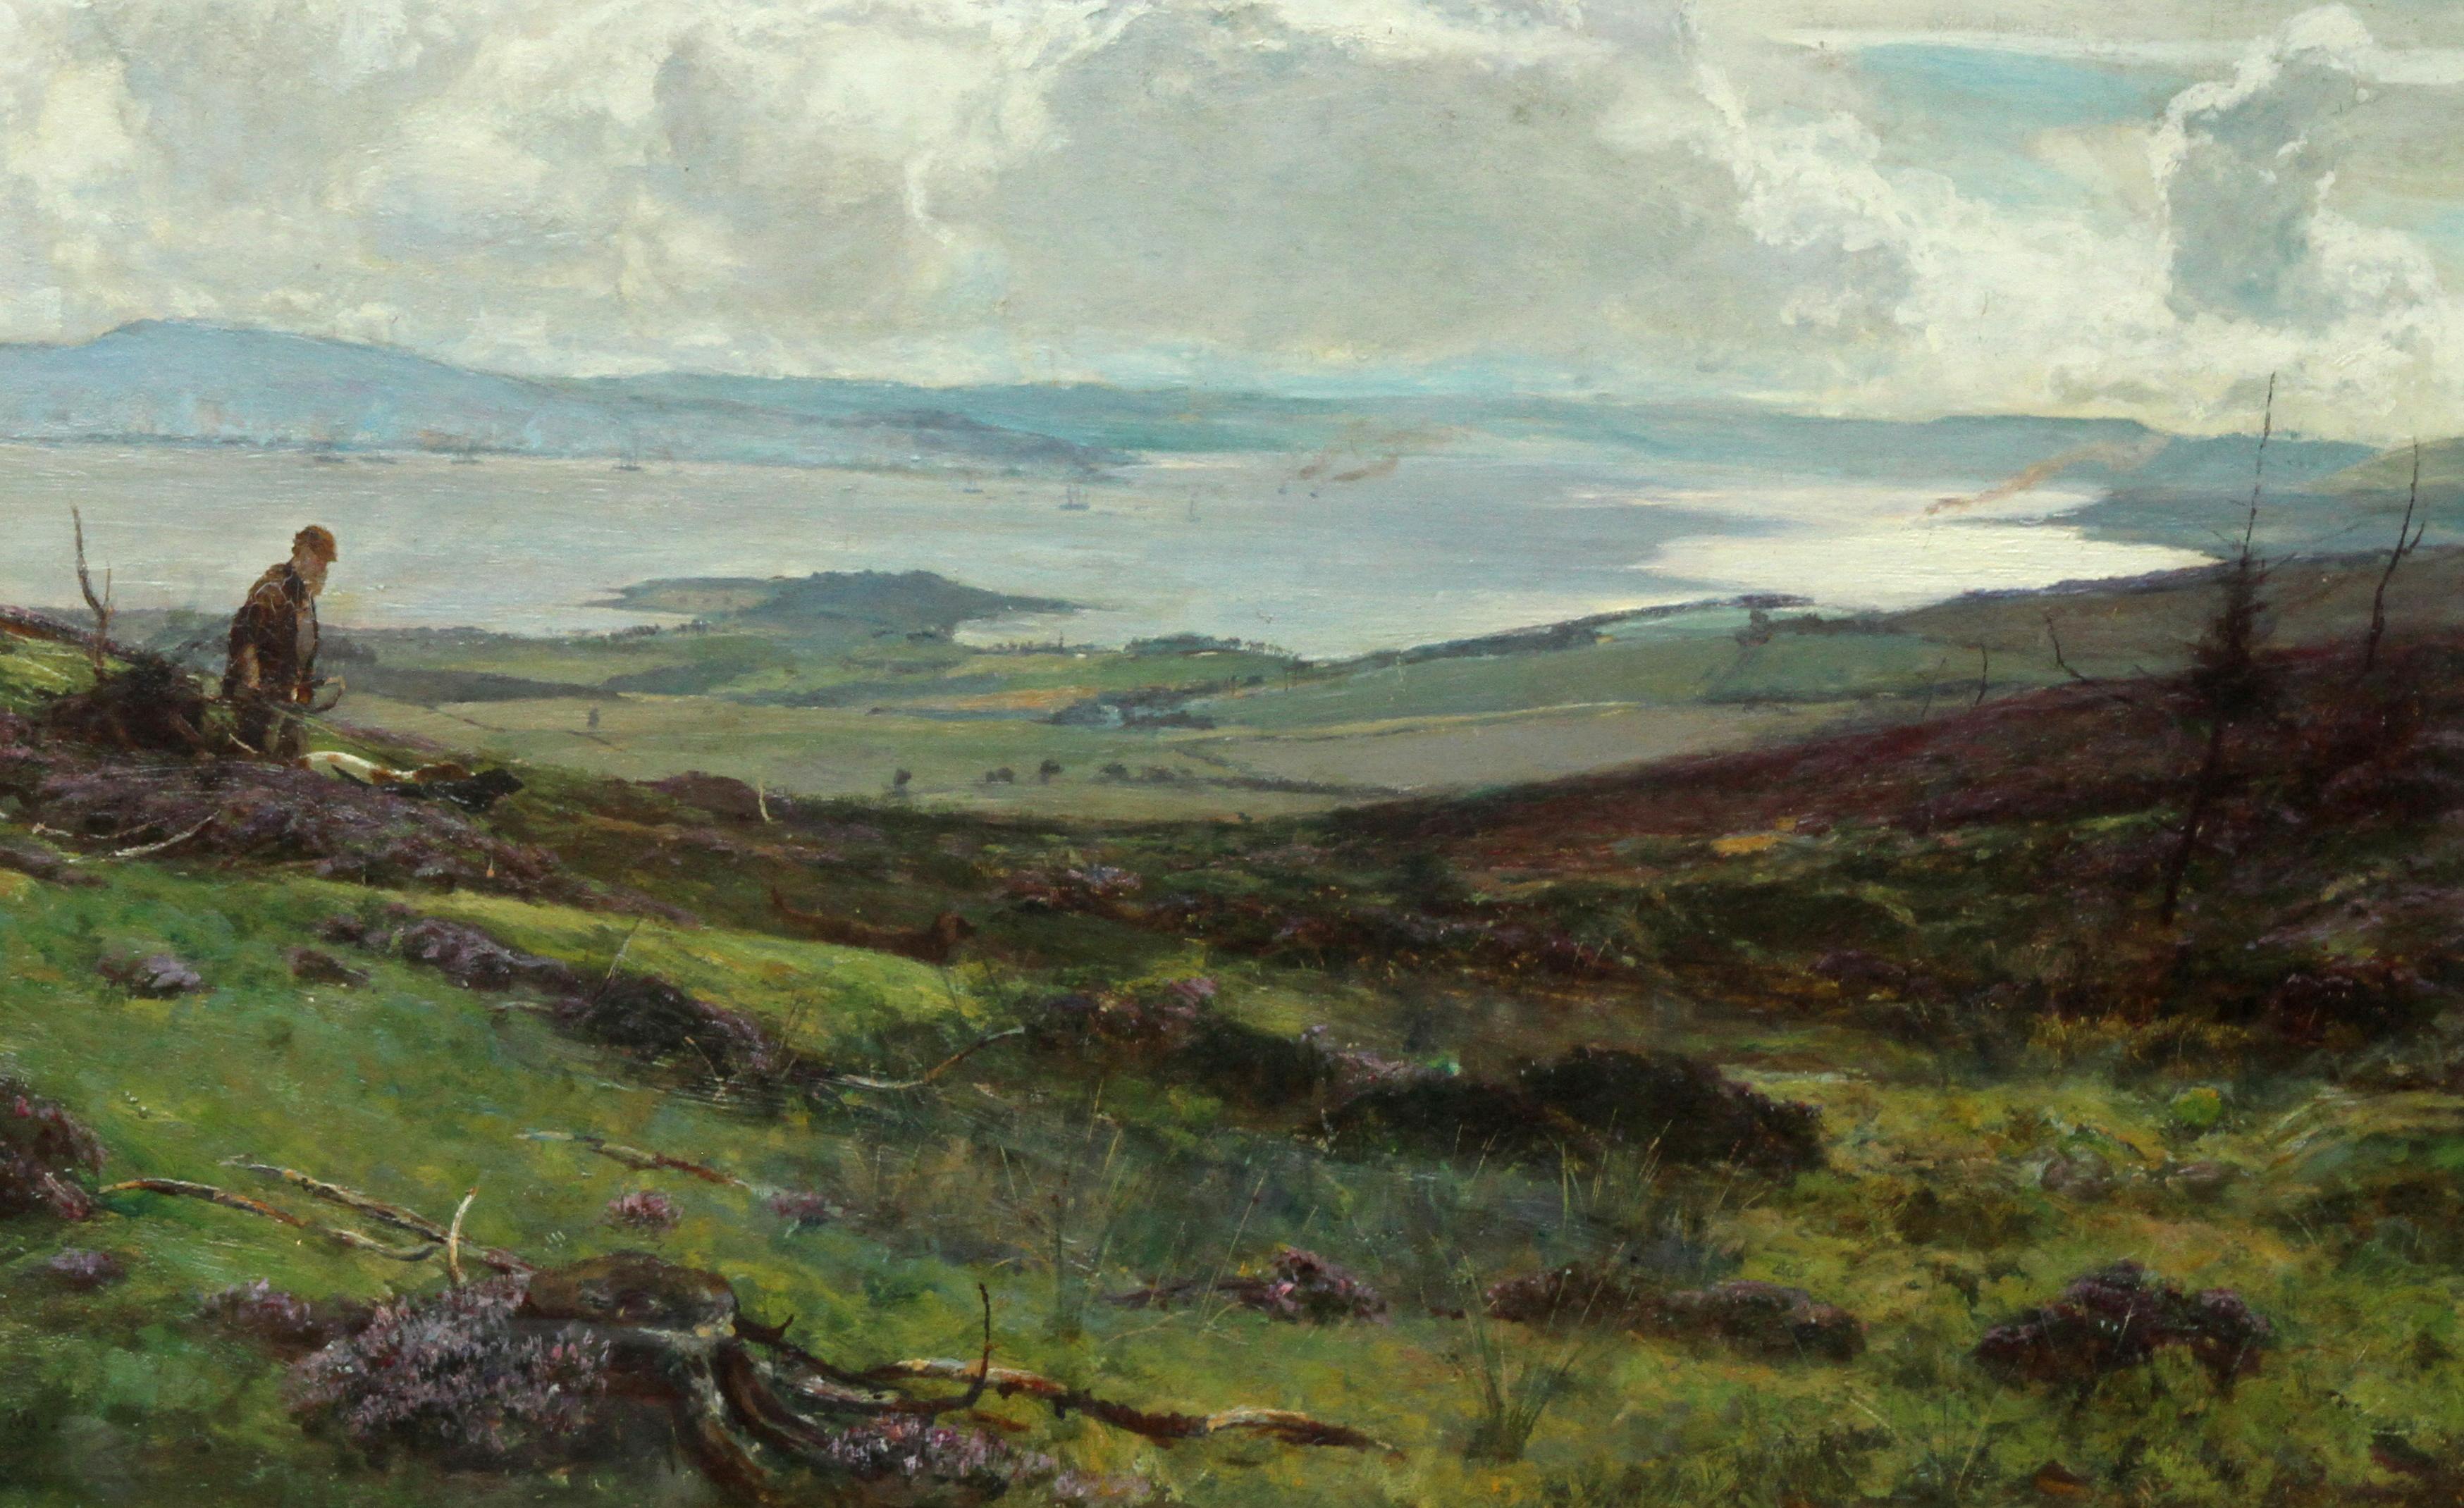 The Clyde from Darleith Moor above Cardross - Scottish art Victorian landscape - Realist Painting by Sir David Murray